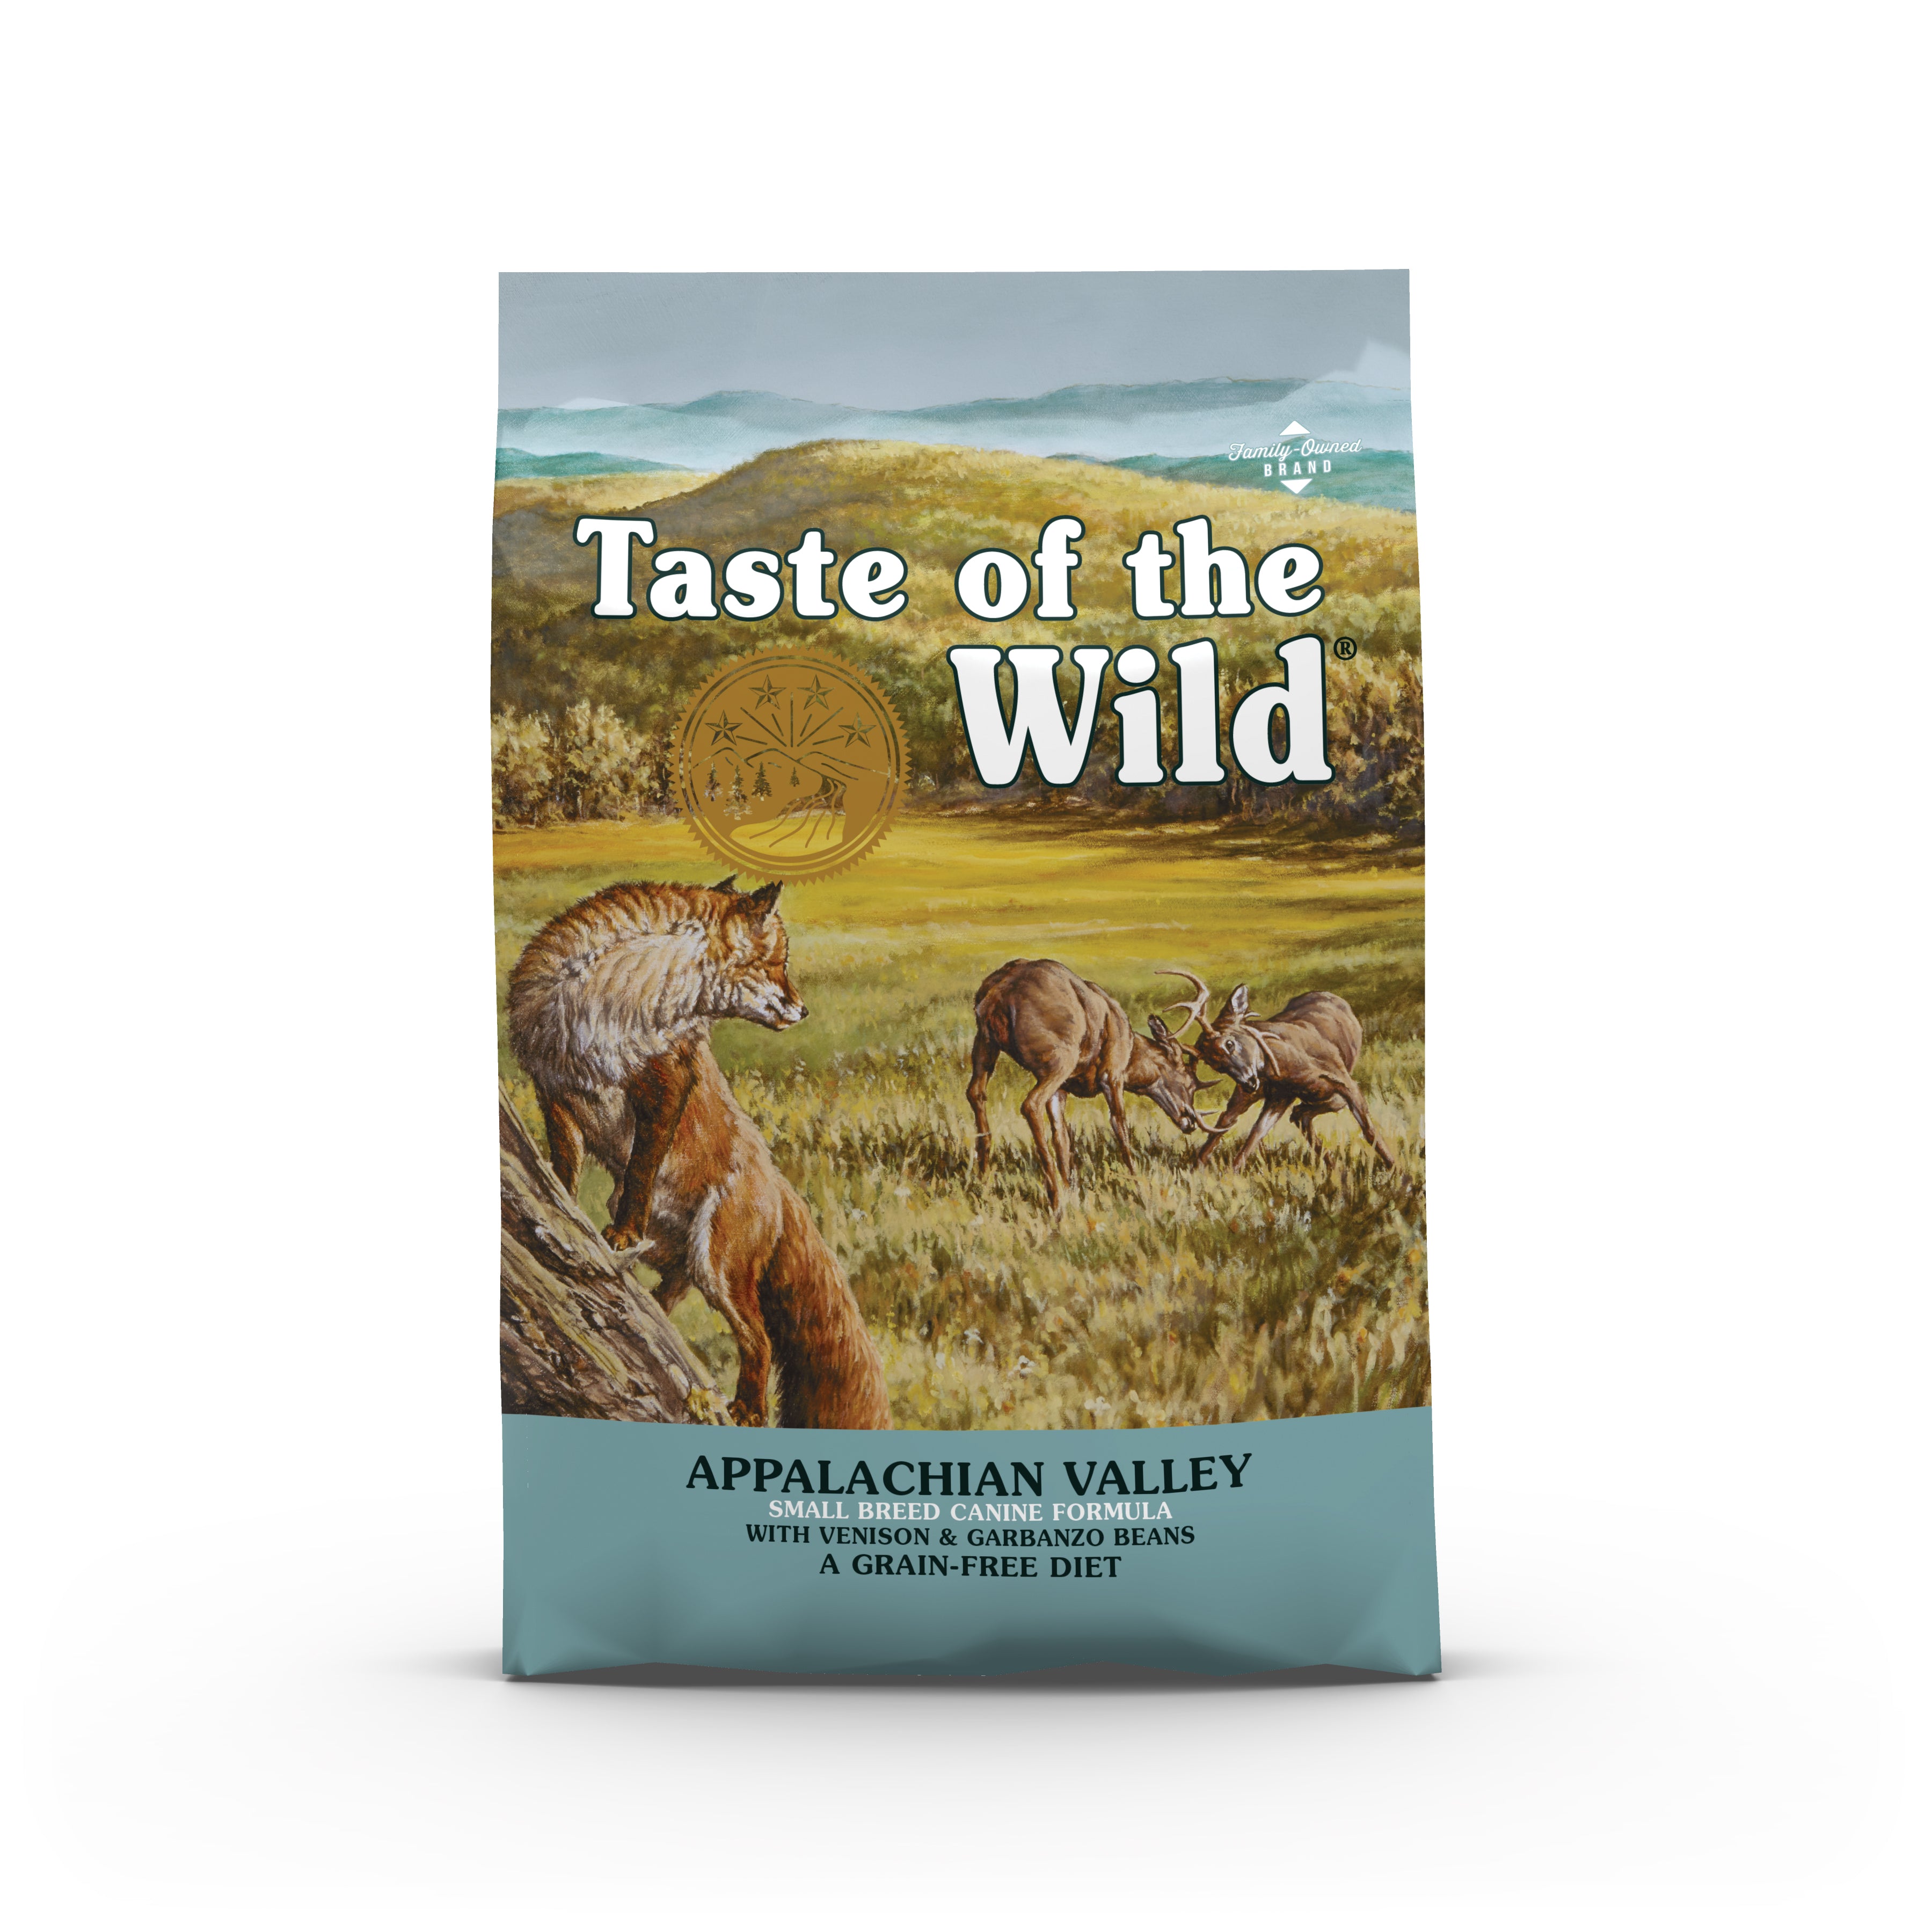 Taste of The Wild - Appalachian Valley Small Breed Canine Formula with Venison & Garbanzo Beans